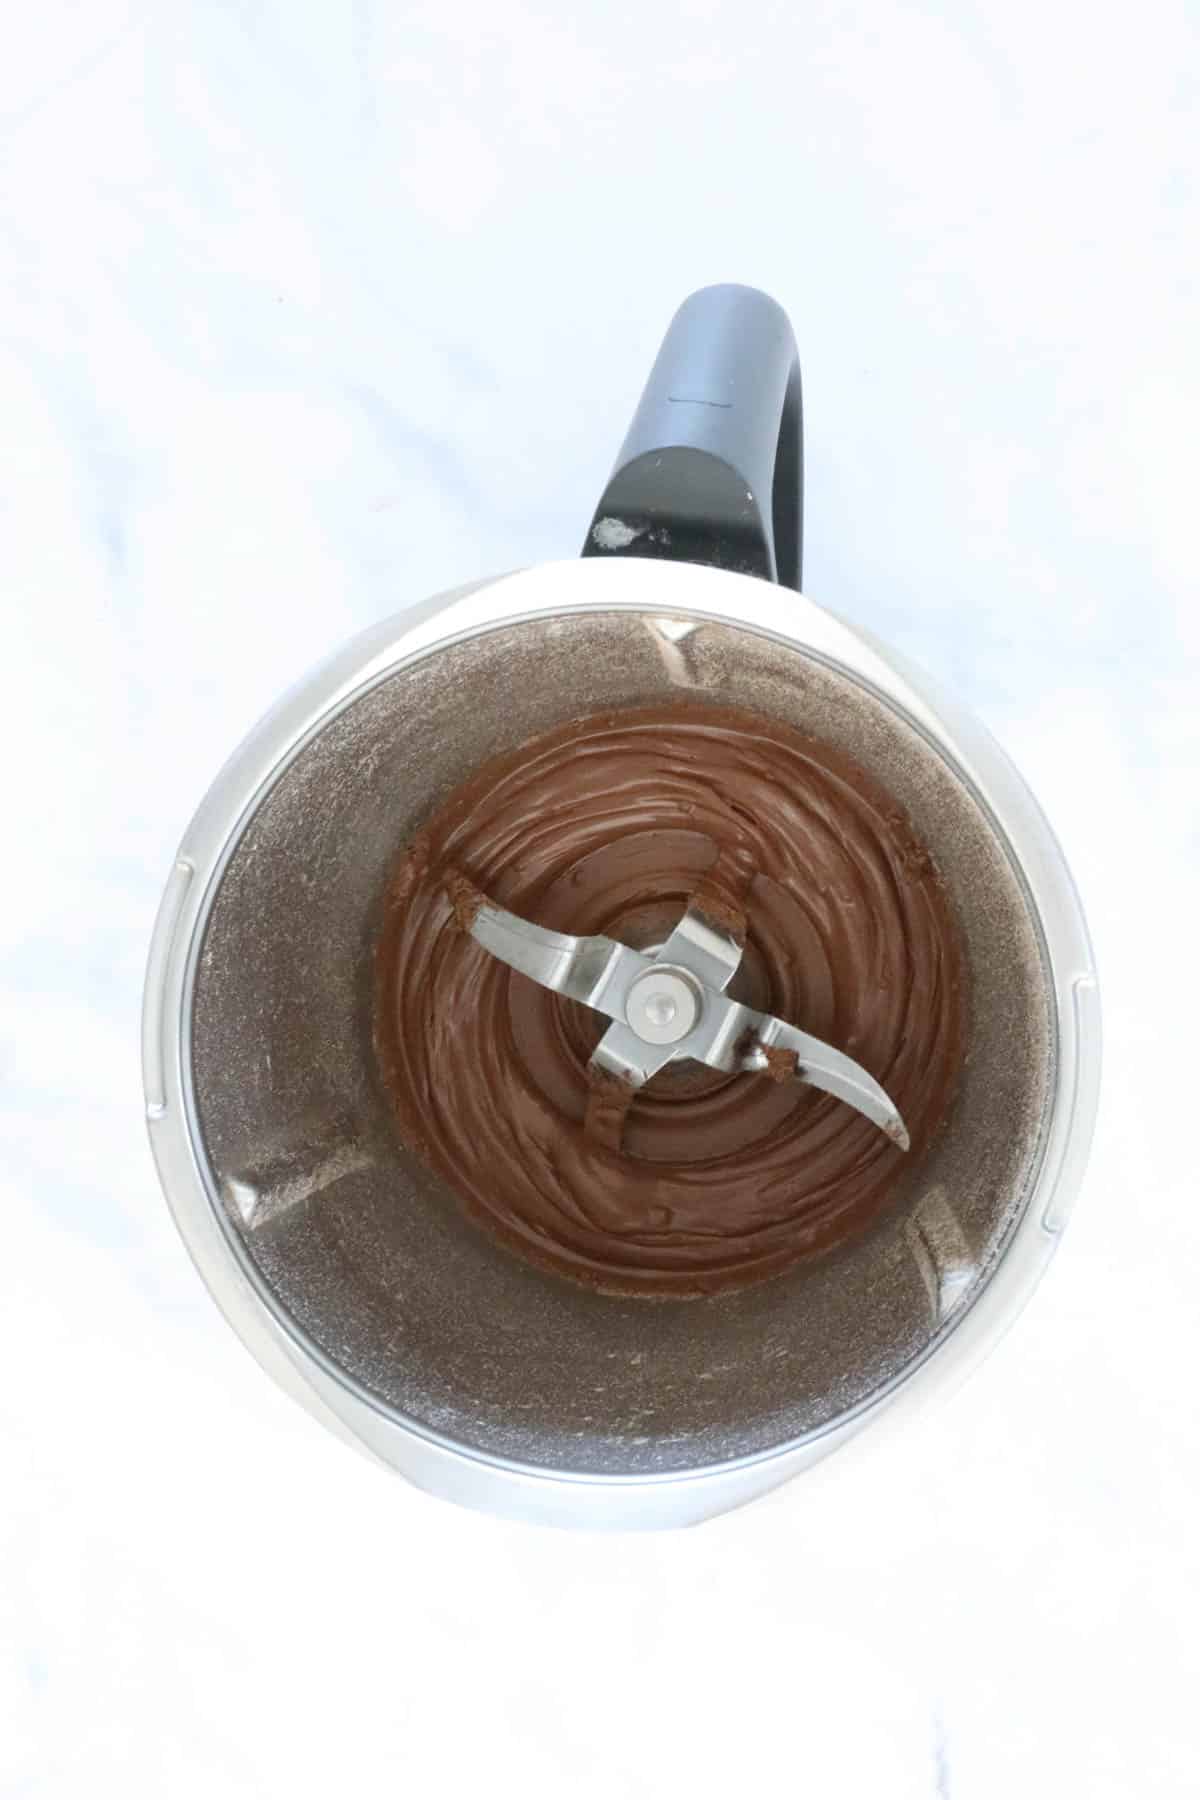 Melted chocolate in a Thermomix.